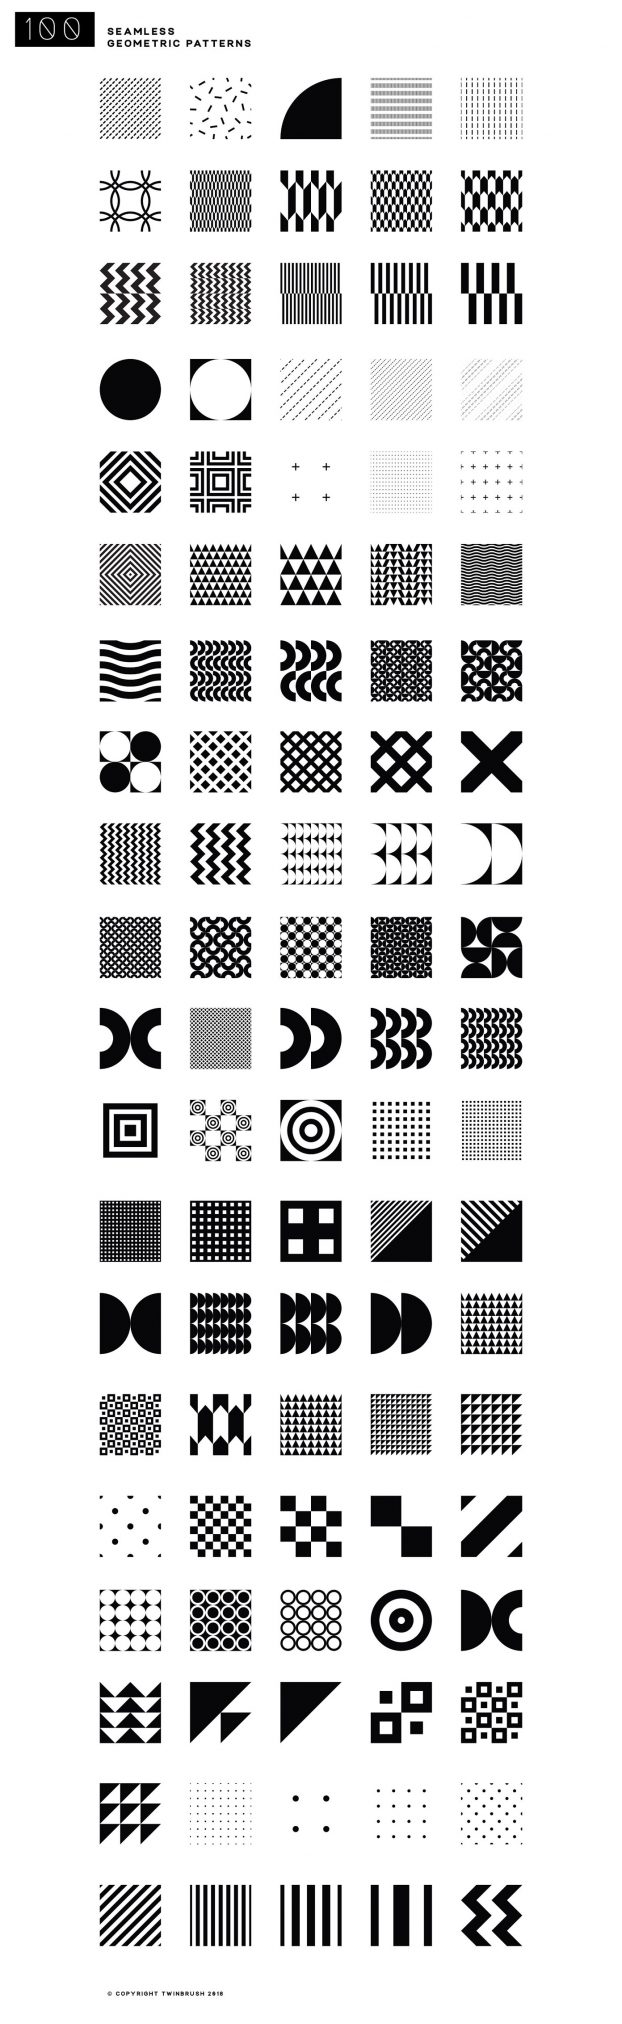 all patterns